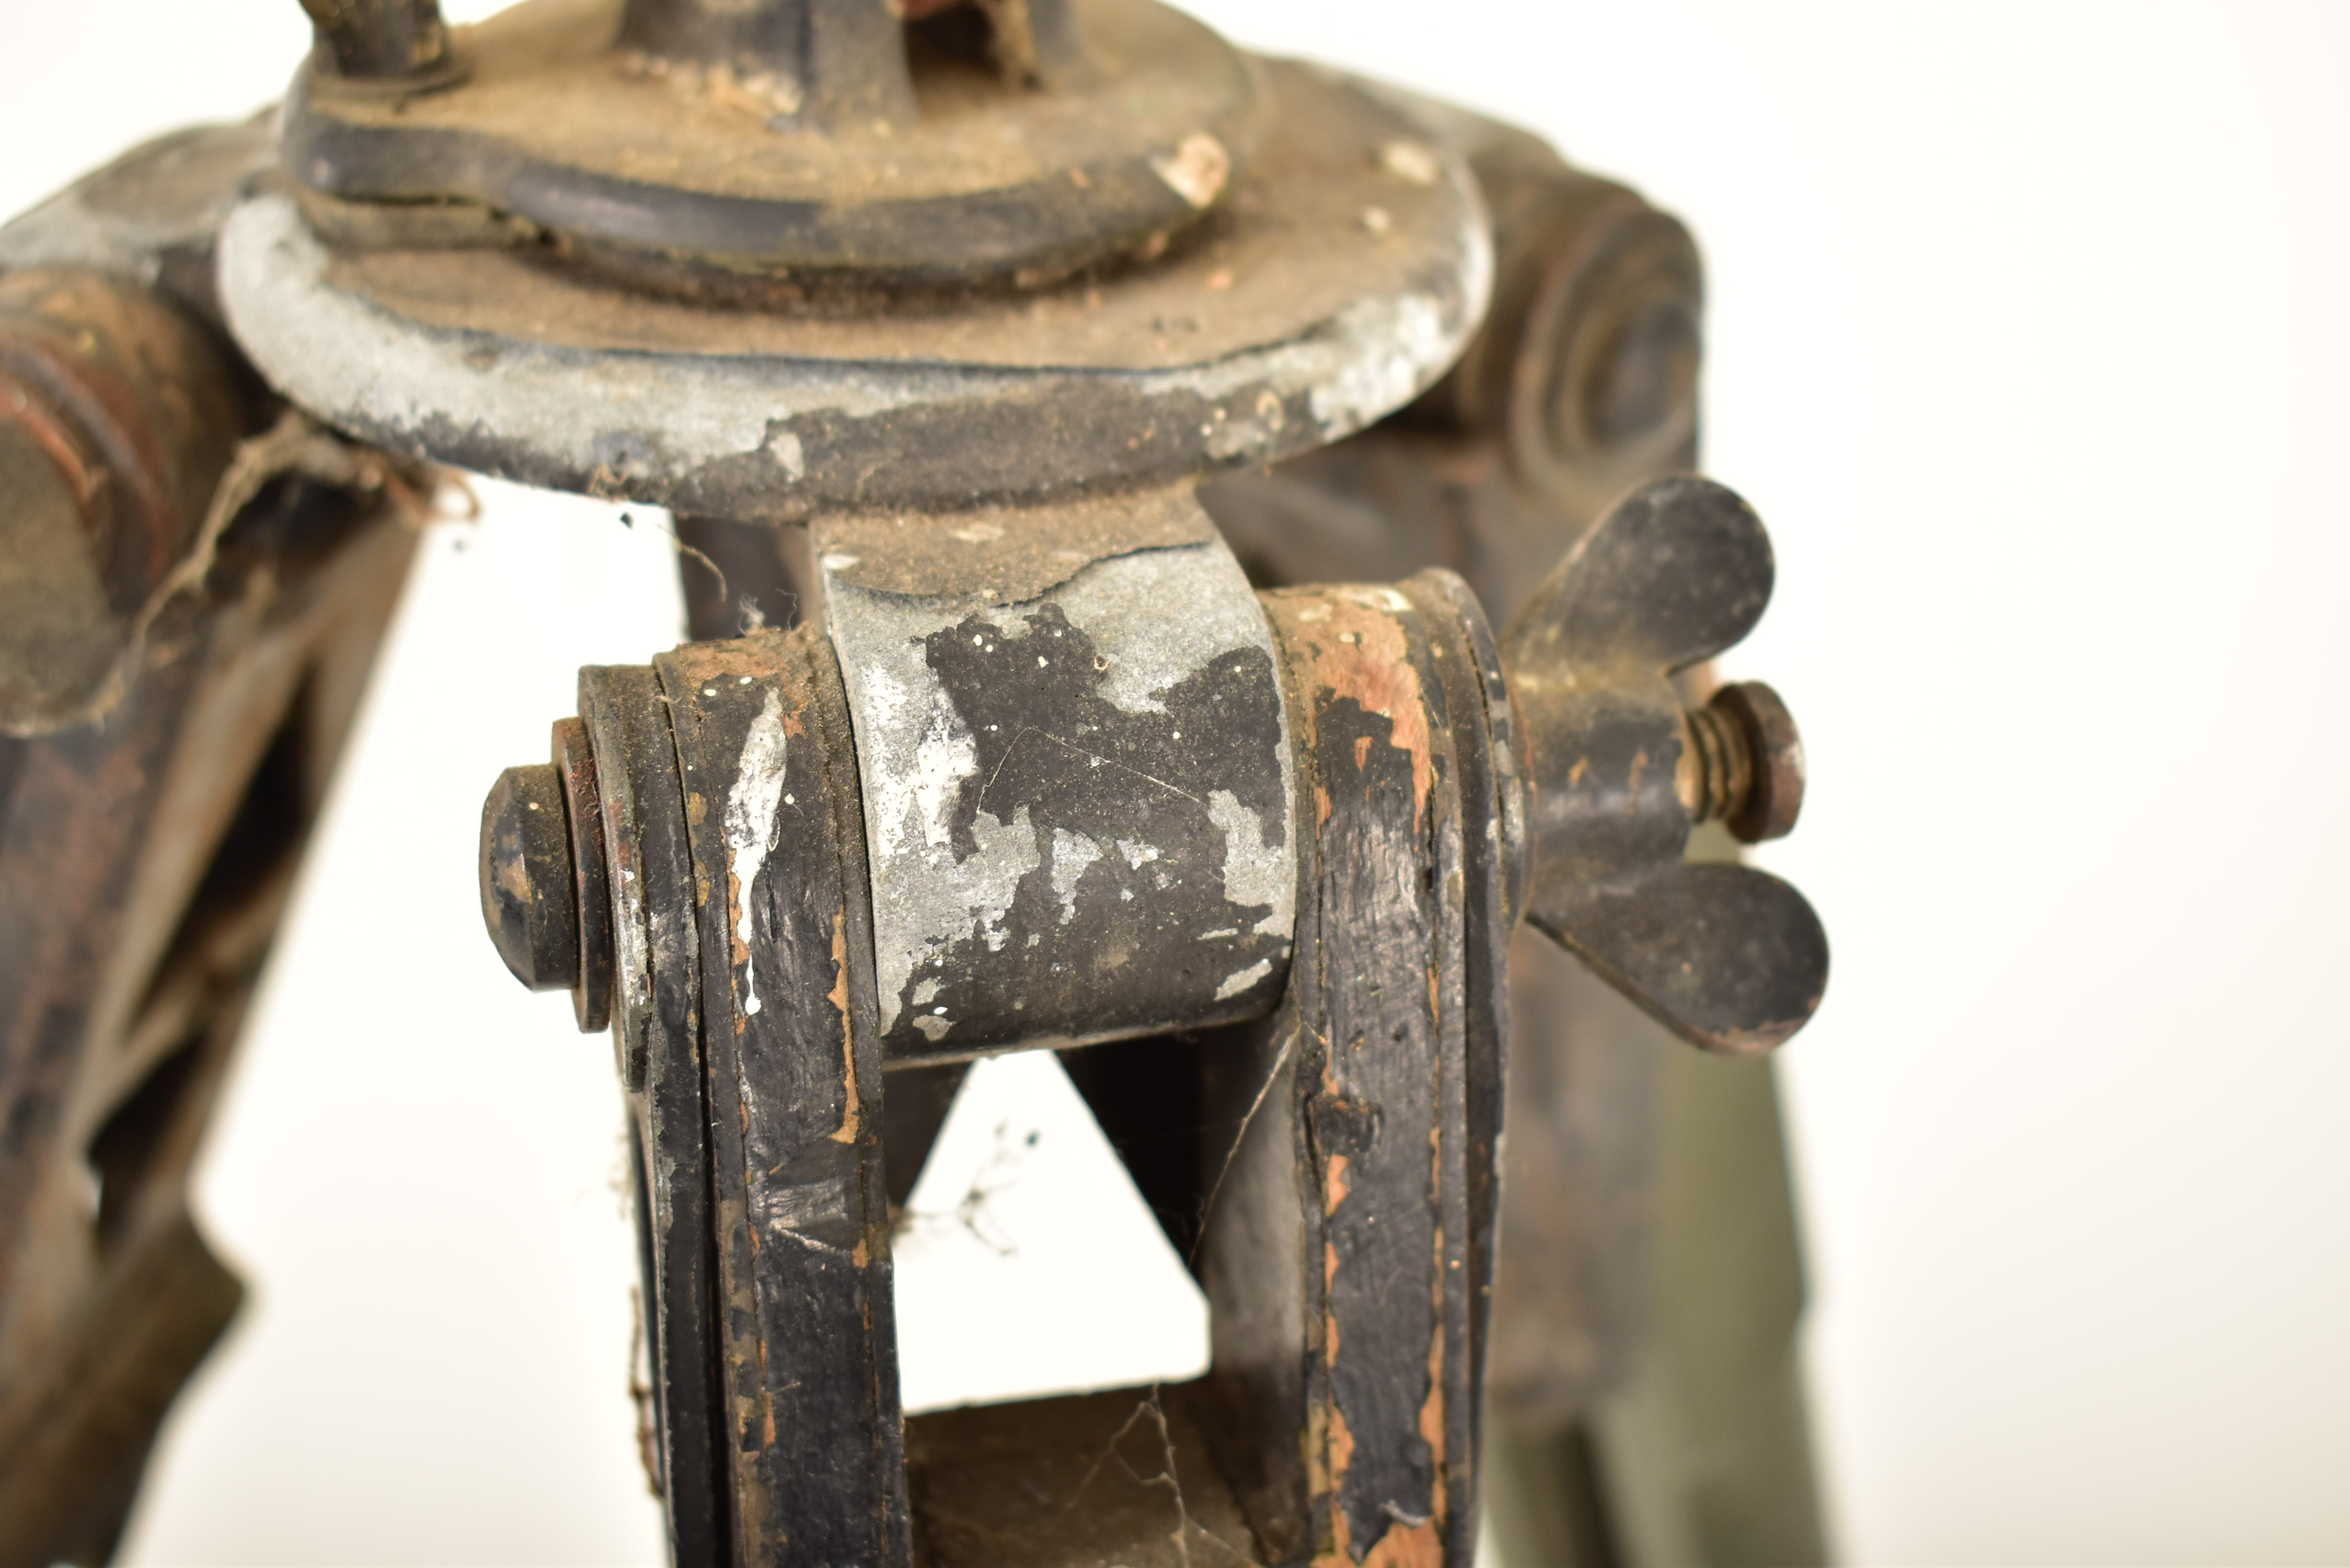 MID 20TH CENTURY WOOD & METAL MILITARY SURVEY TRIPOD STAND - Image 6 of 6